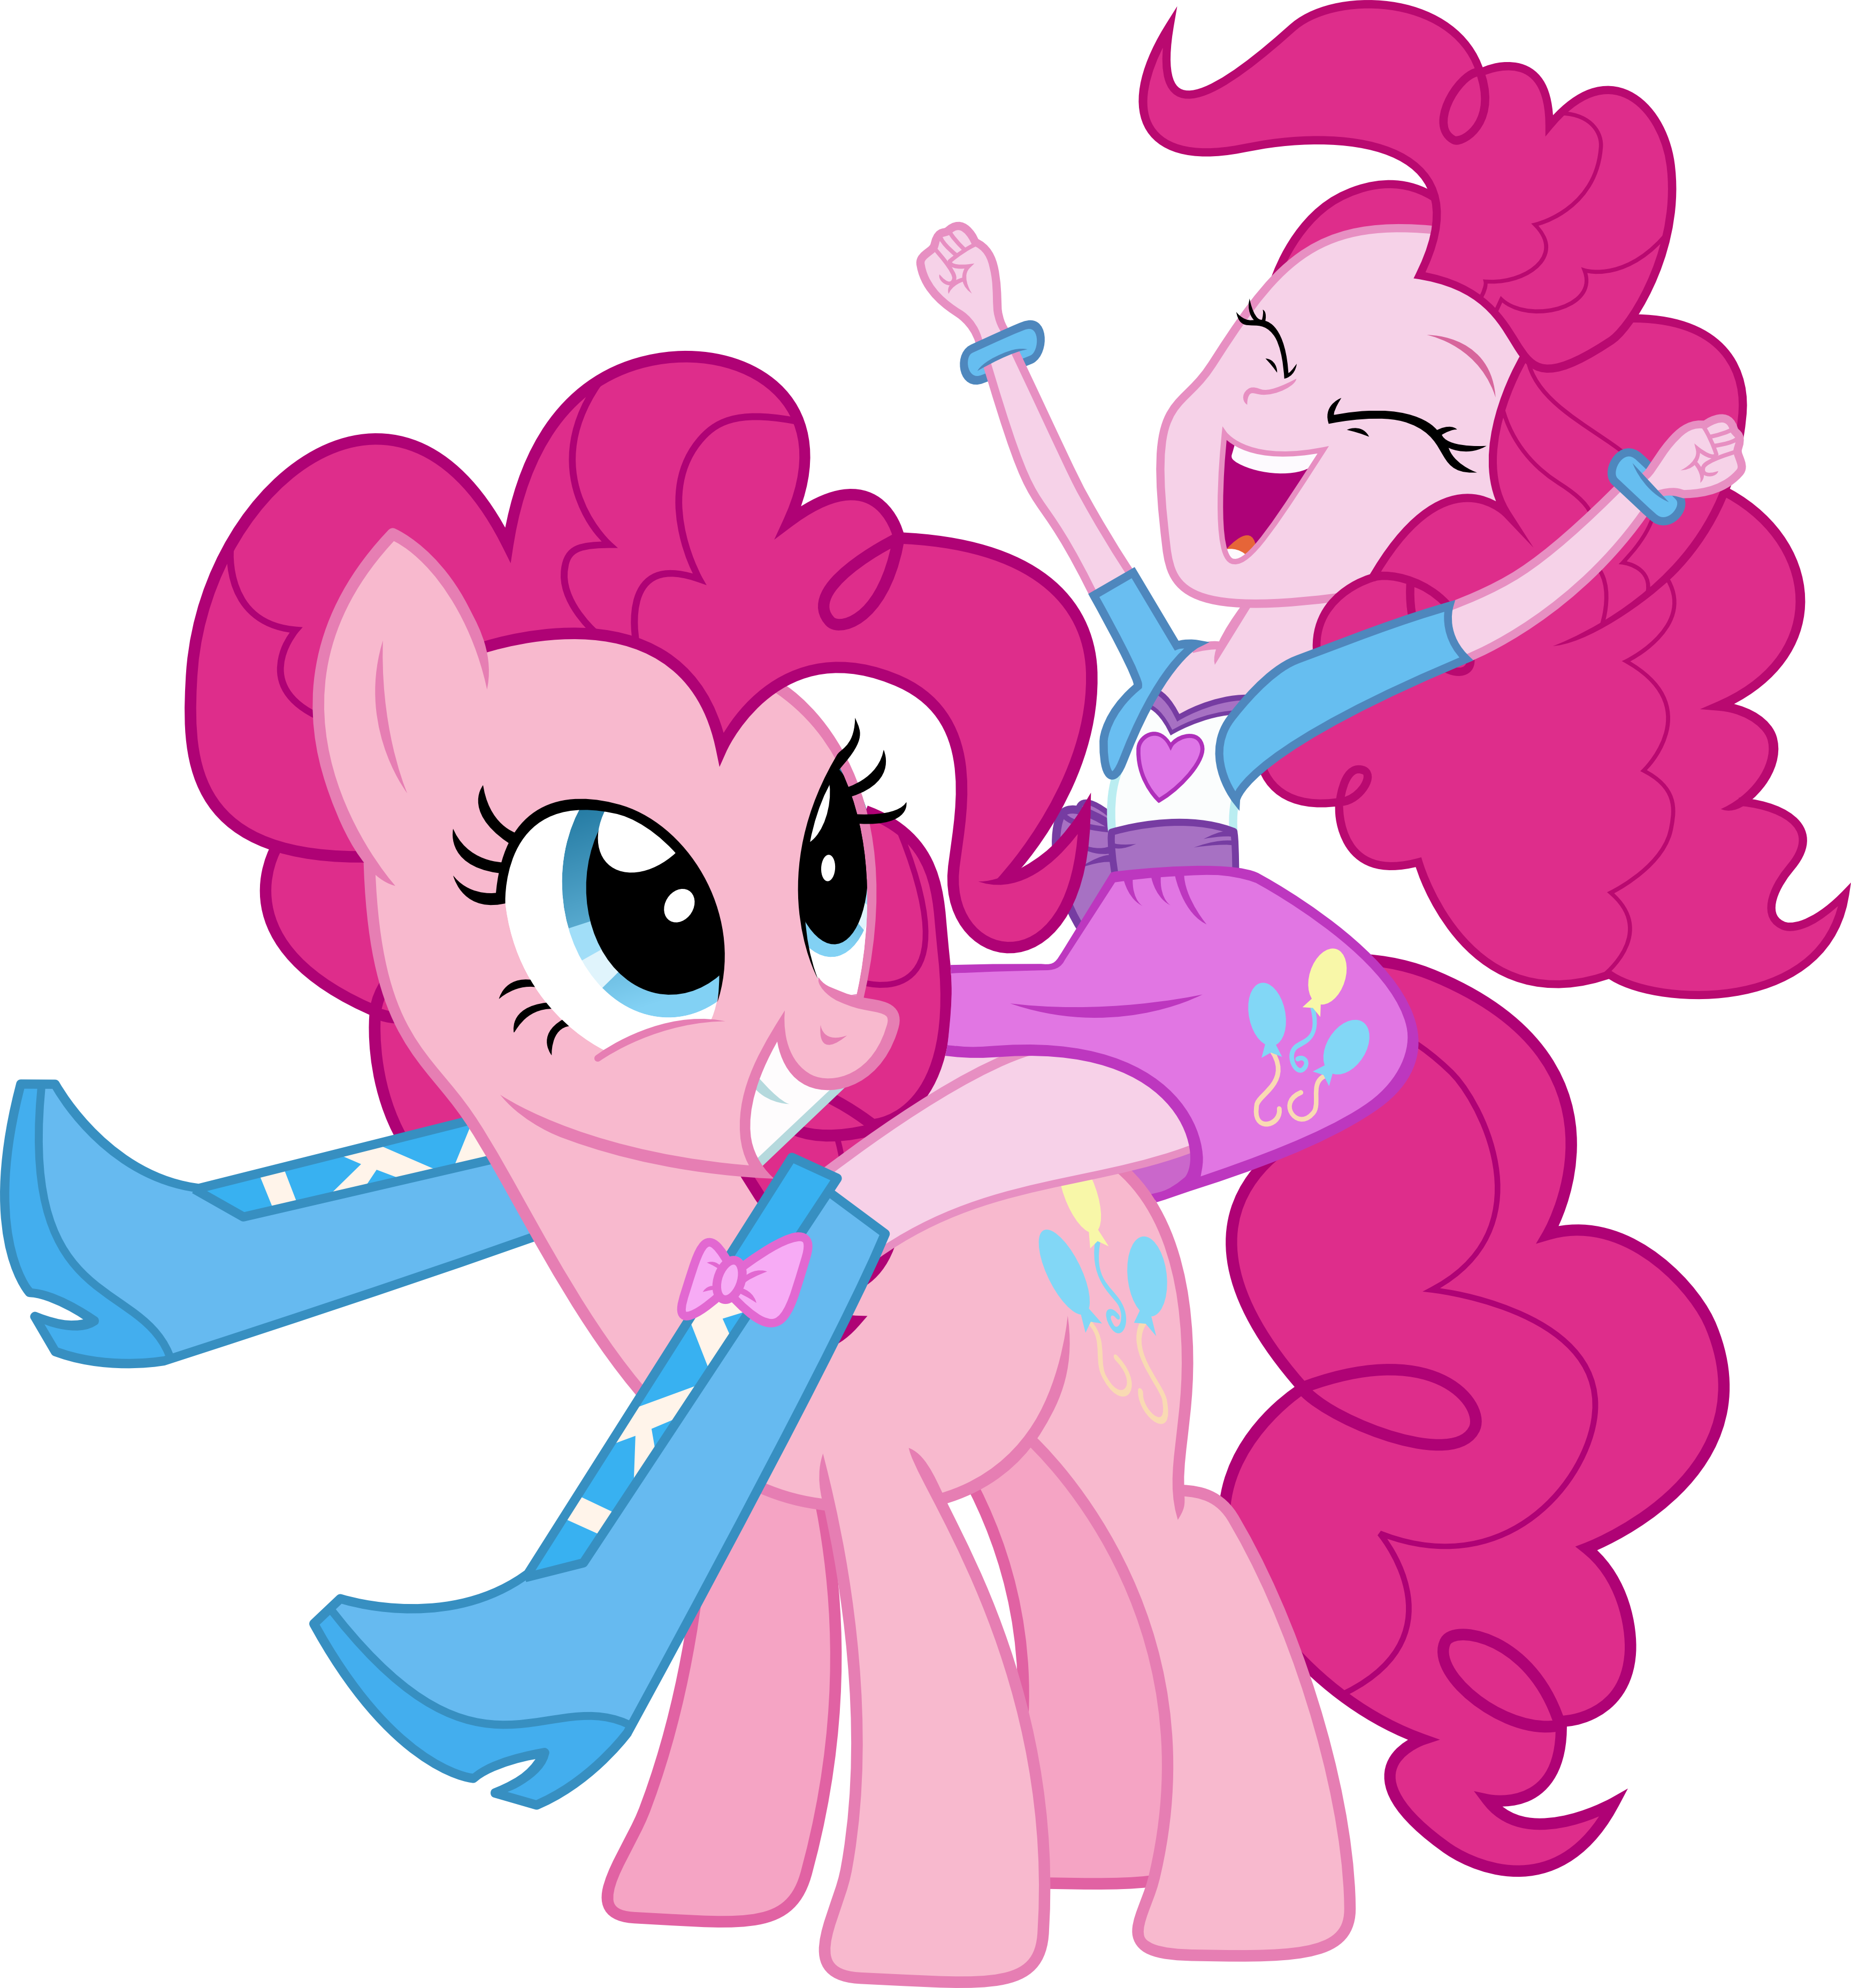 Pinkie Pie and Pinkie Pie by Vector-Brony on DeviantArt